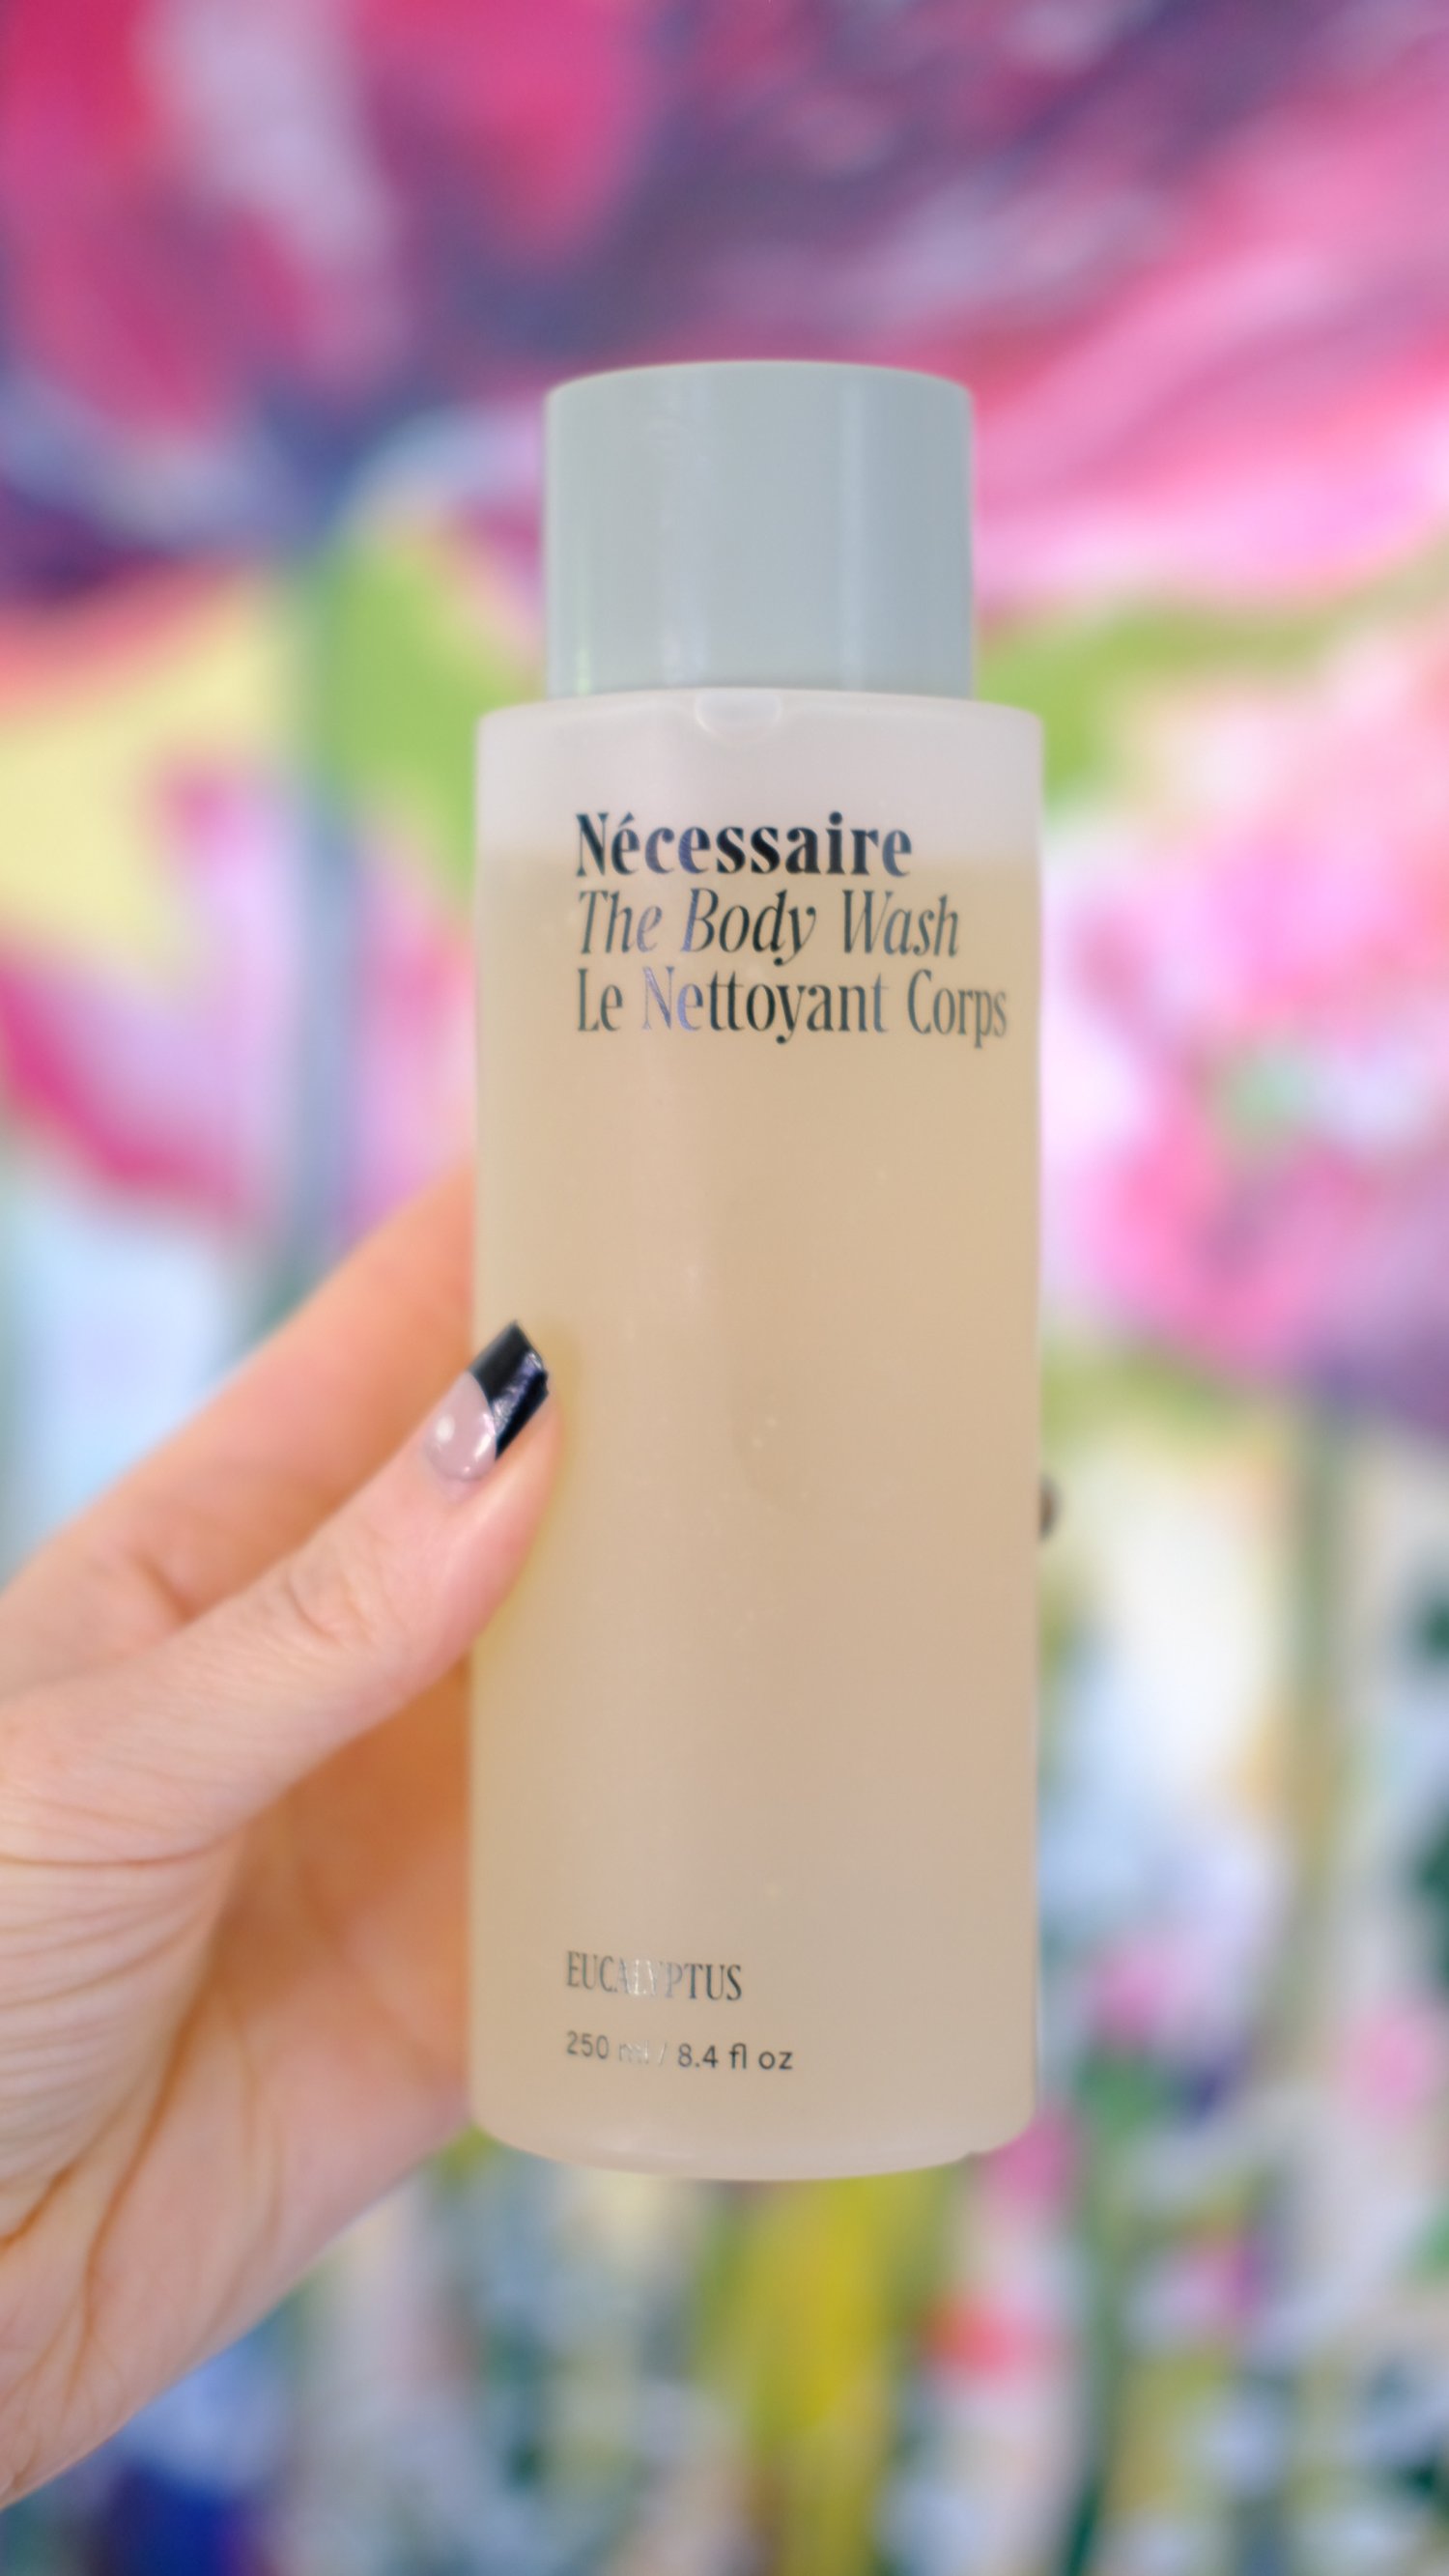 Find out the best Necessaire products in this detailed Necessaire review. I have included a Necessaire body wash review, a Necessaire body lotion review, a Necessaire body exfoliator review and a Necessaire hand cream review! Best of all, I have incl